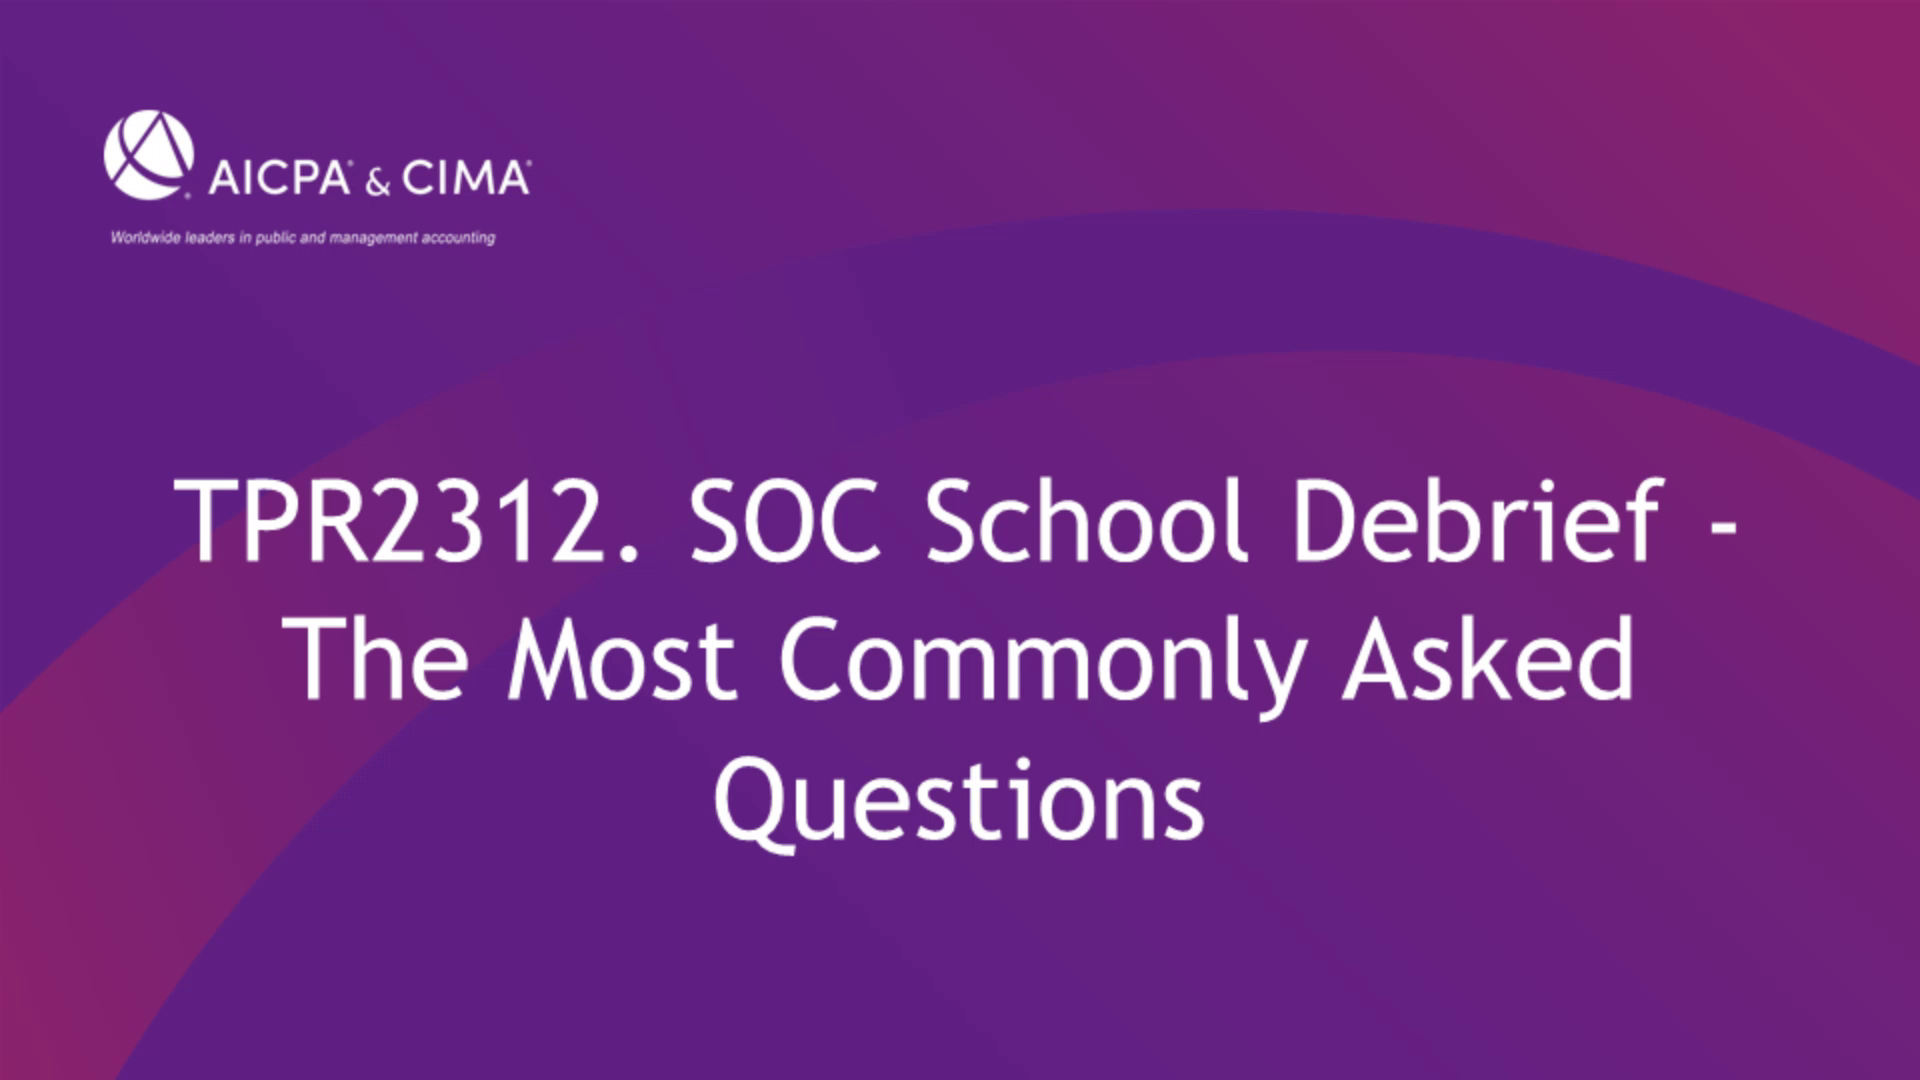 SOC School Debrief - The Most Commonly Asked Questions icon